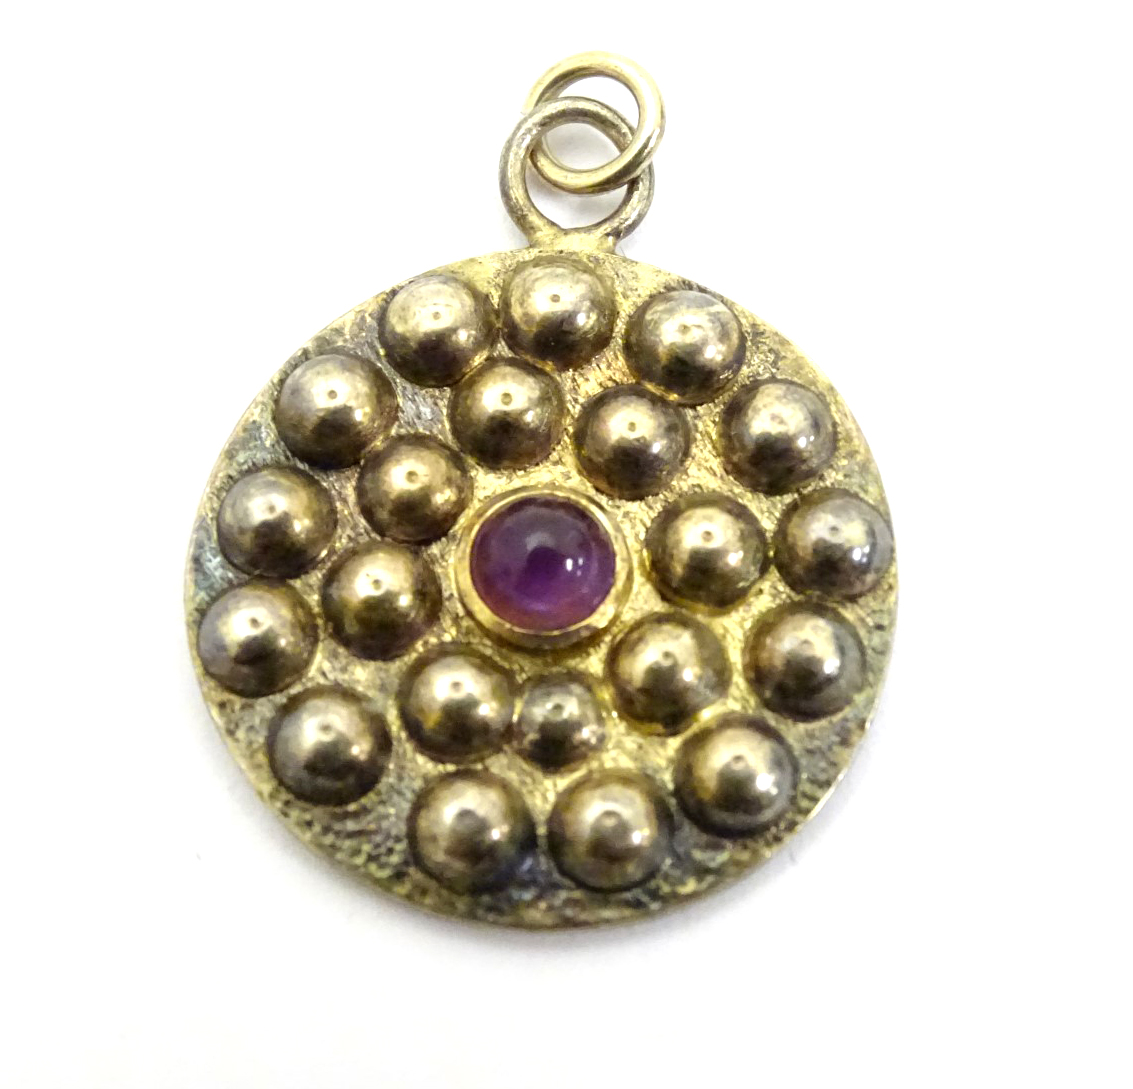 Robert Welch Silver Gilt Pendant Sold For £140